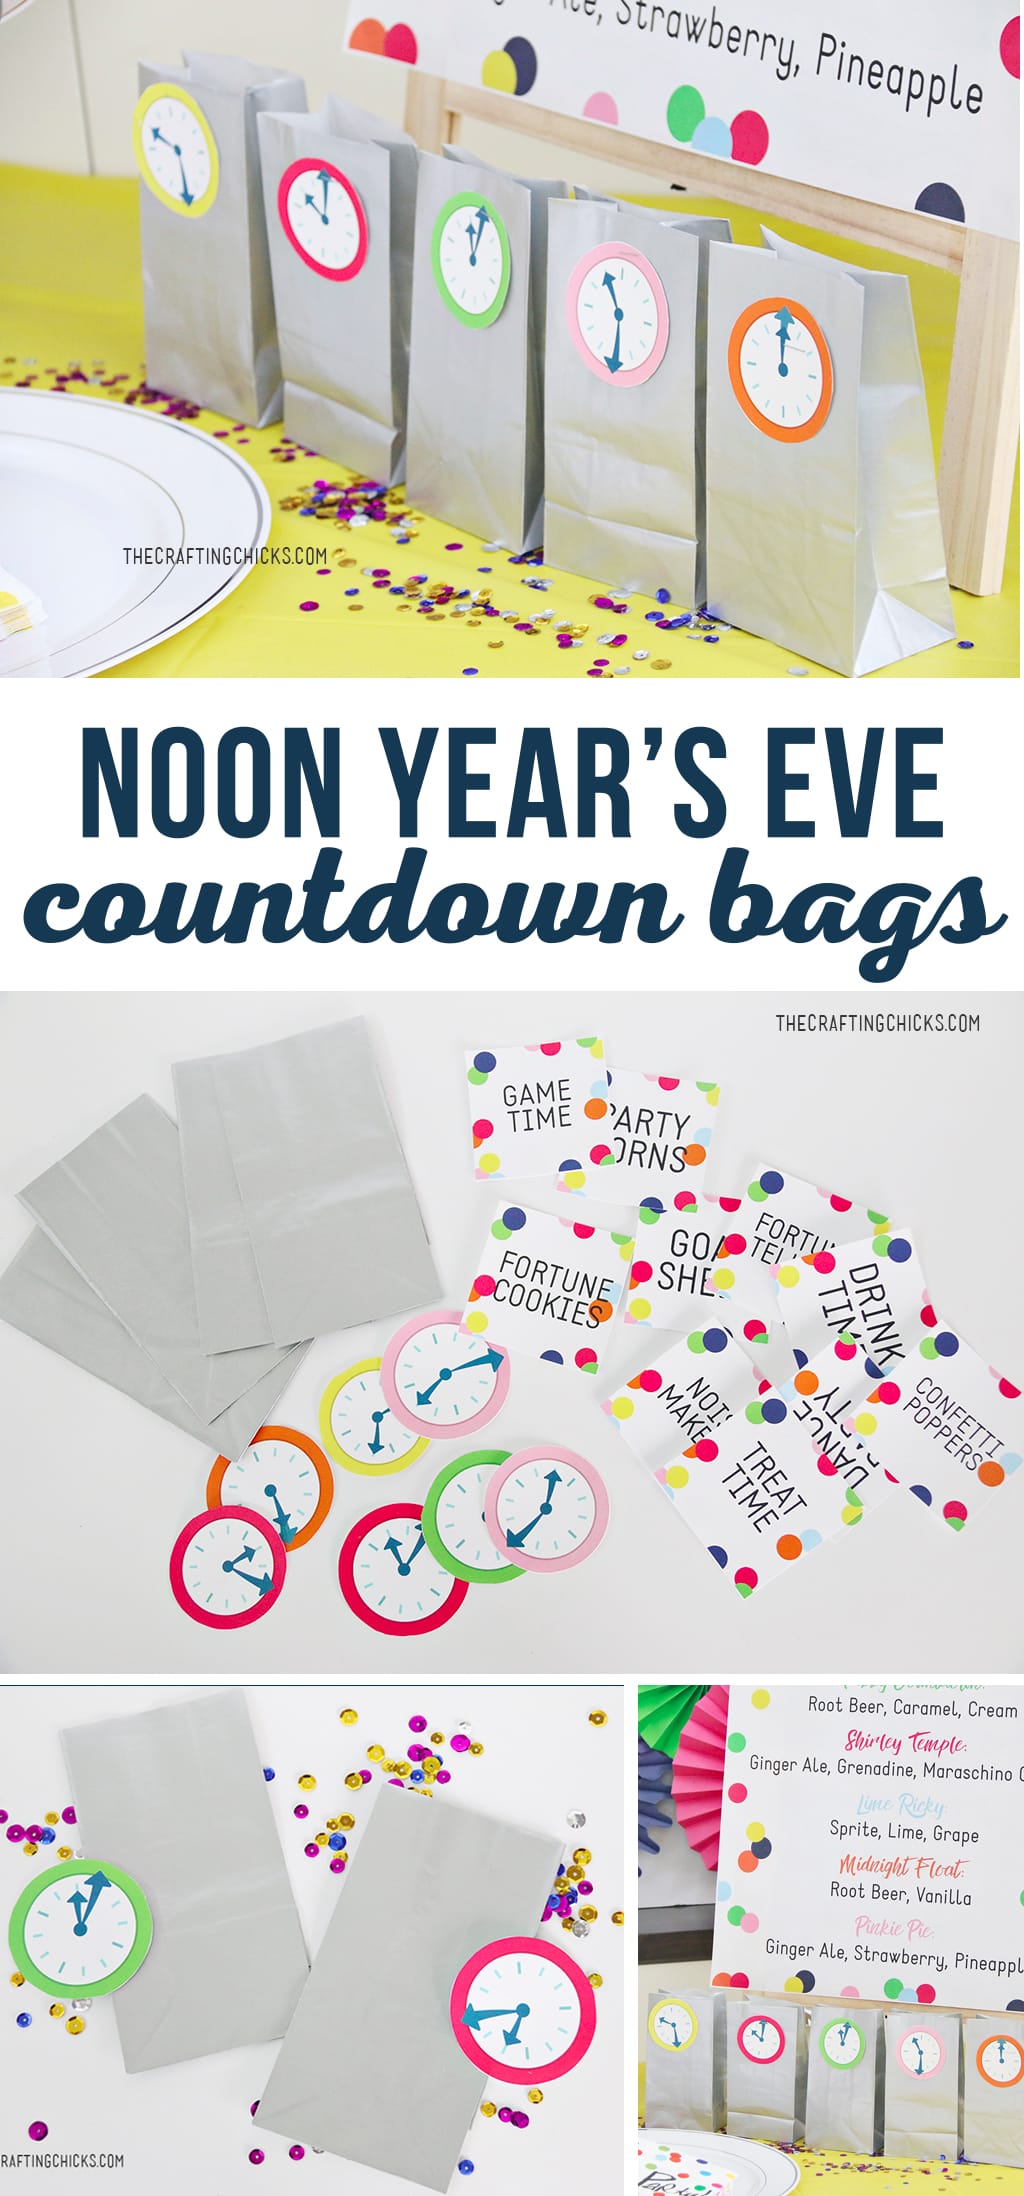 Noon Year's Eve Countdown Bags